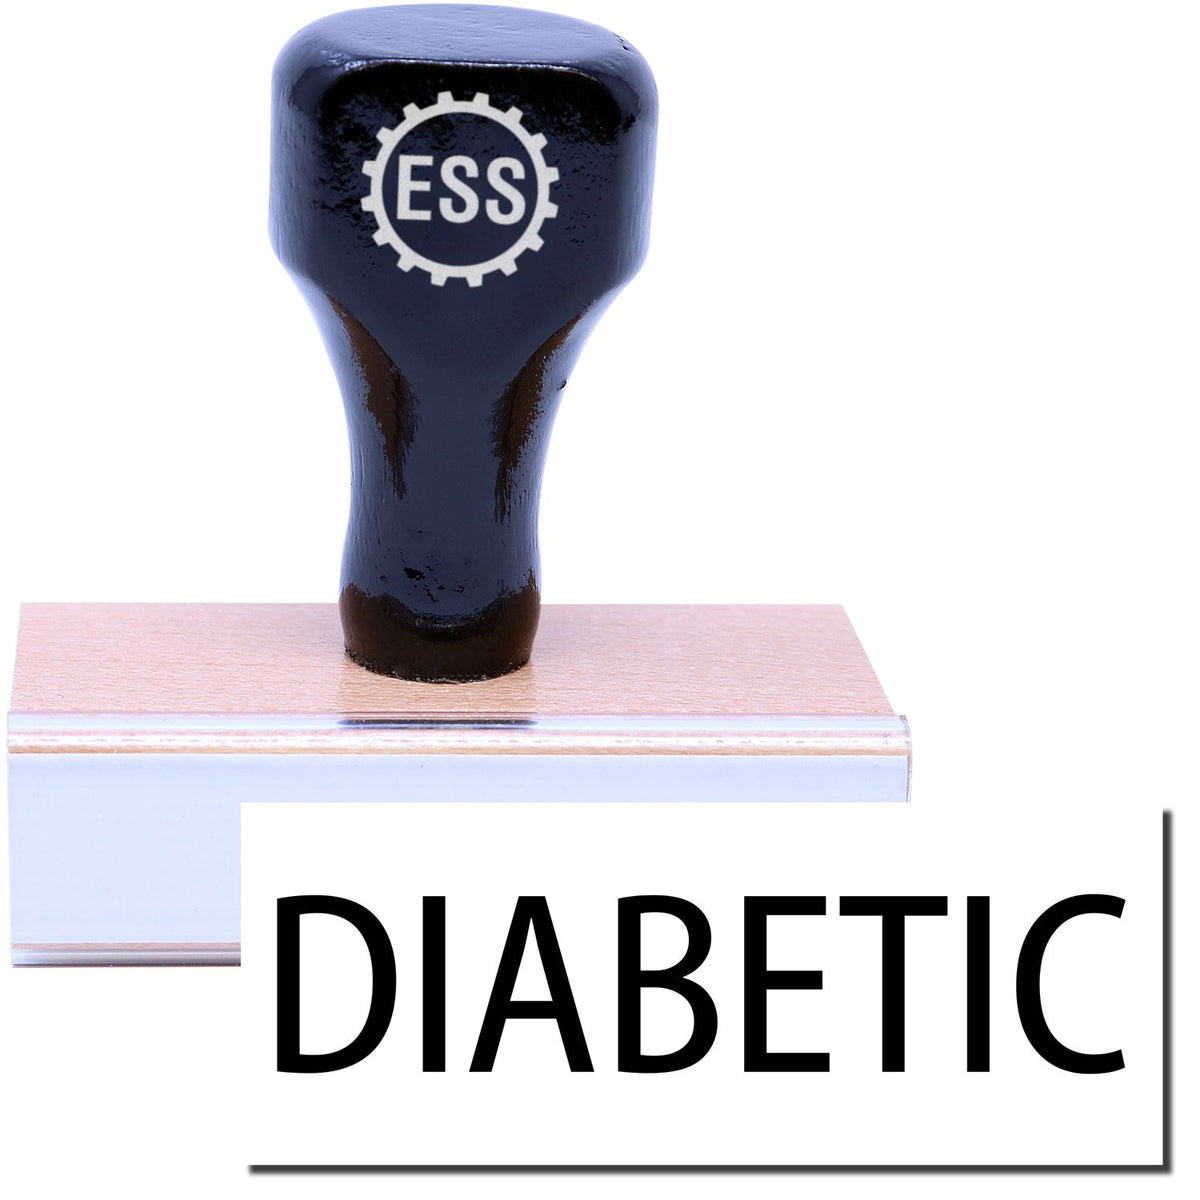 A stock office medical rubber stamp with a stamped image showing how the text &quot;DIABETIC&quot; is displayed after stamping.